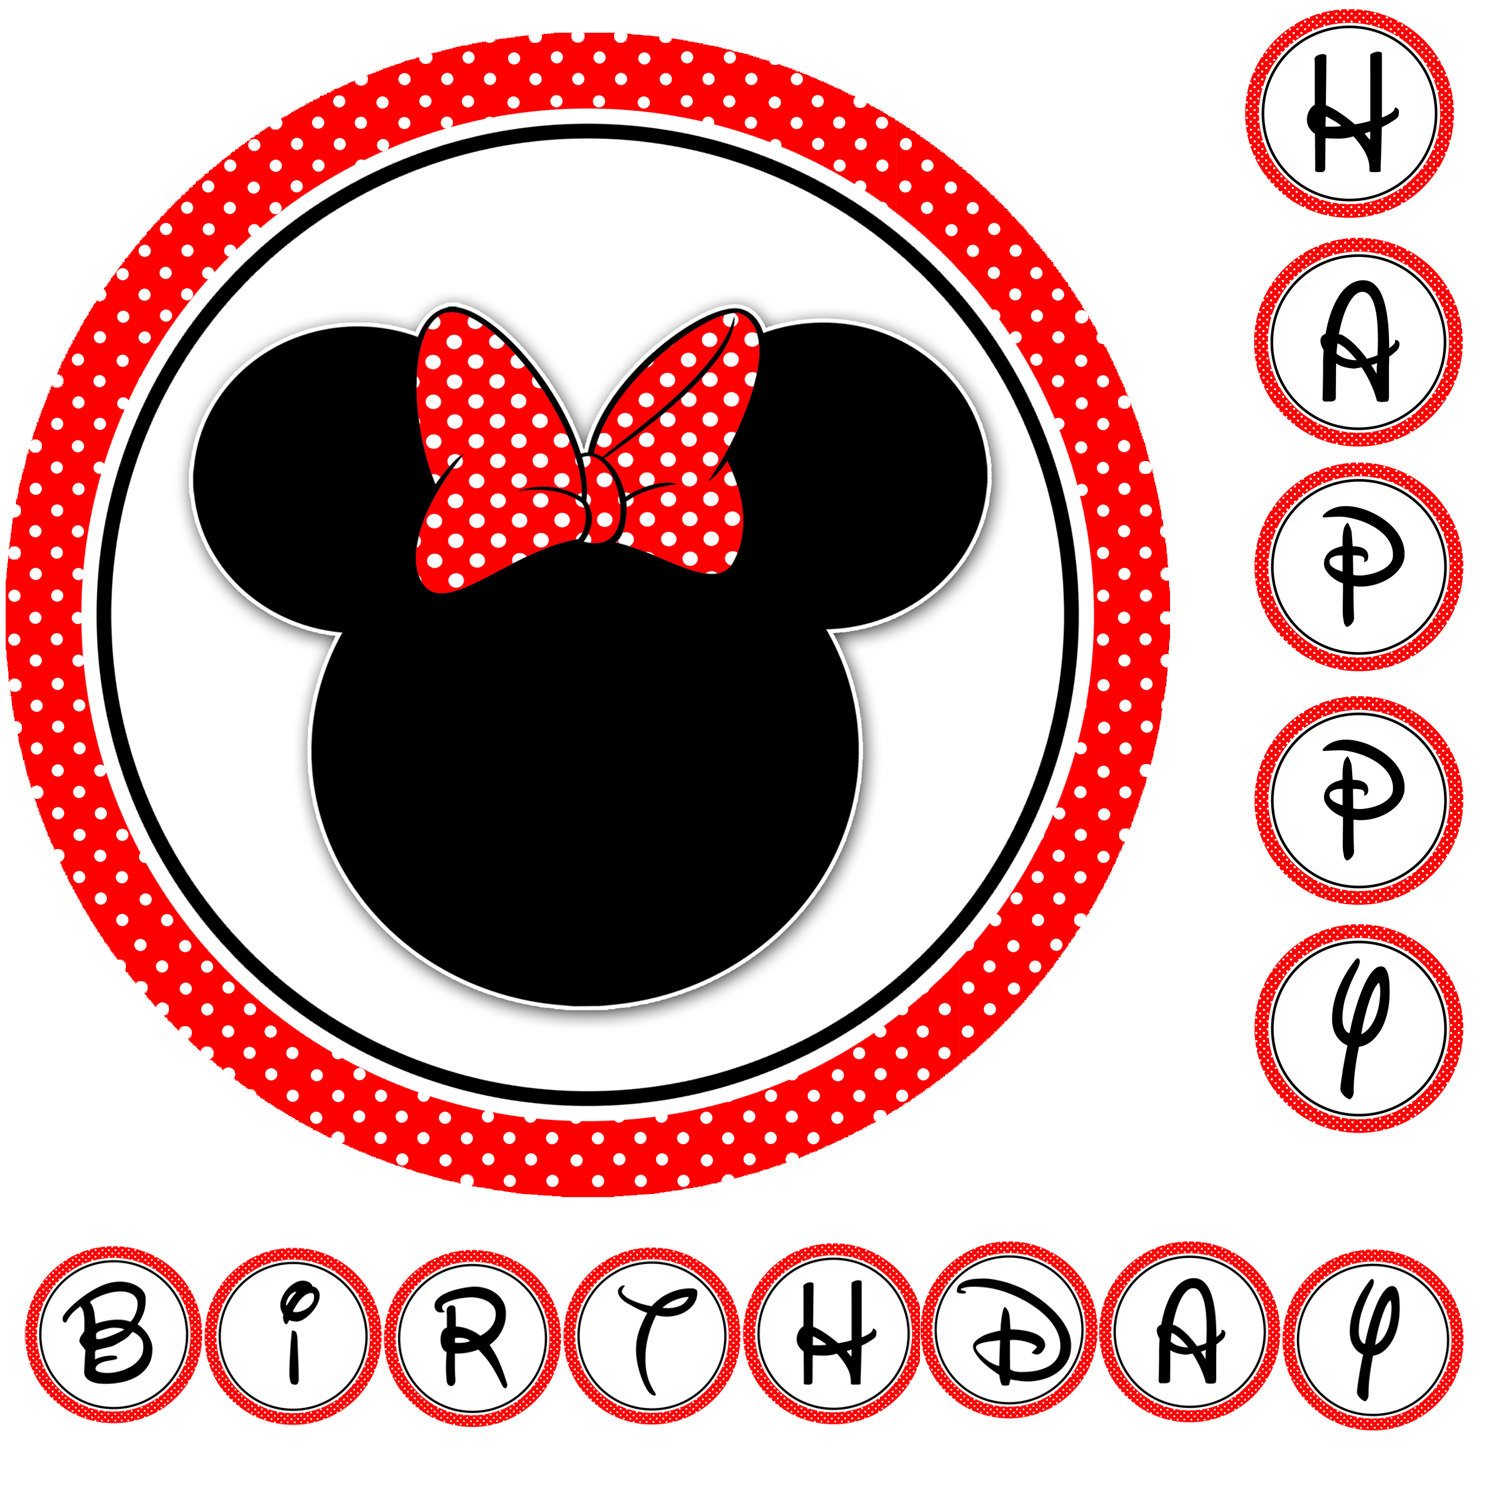 Mickey mouse birthday mickey mouse happy birthday clip art clipart collection 2